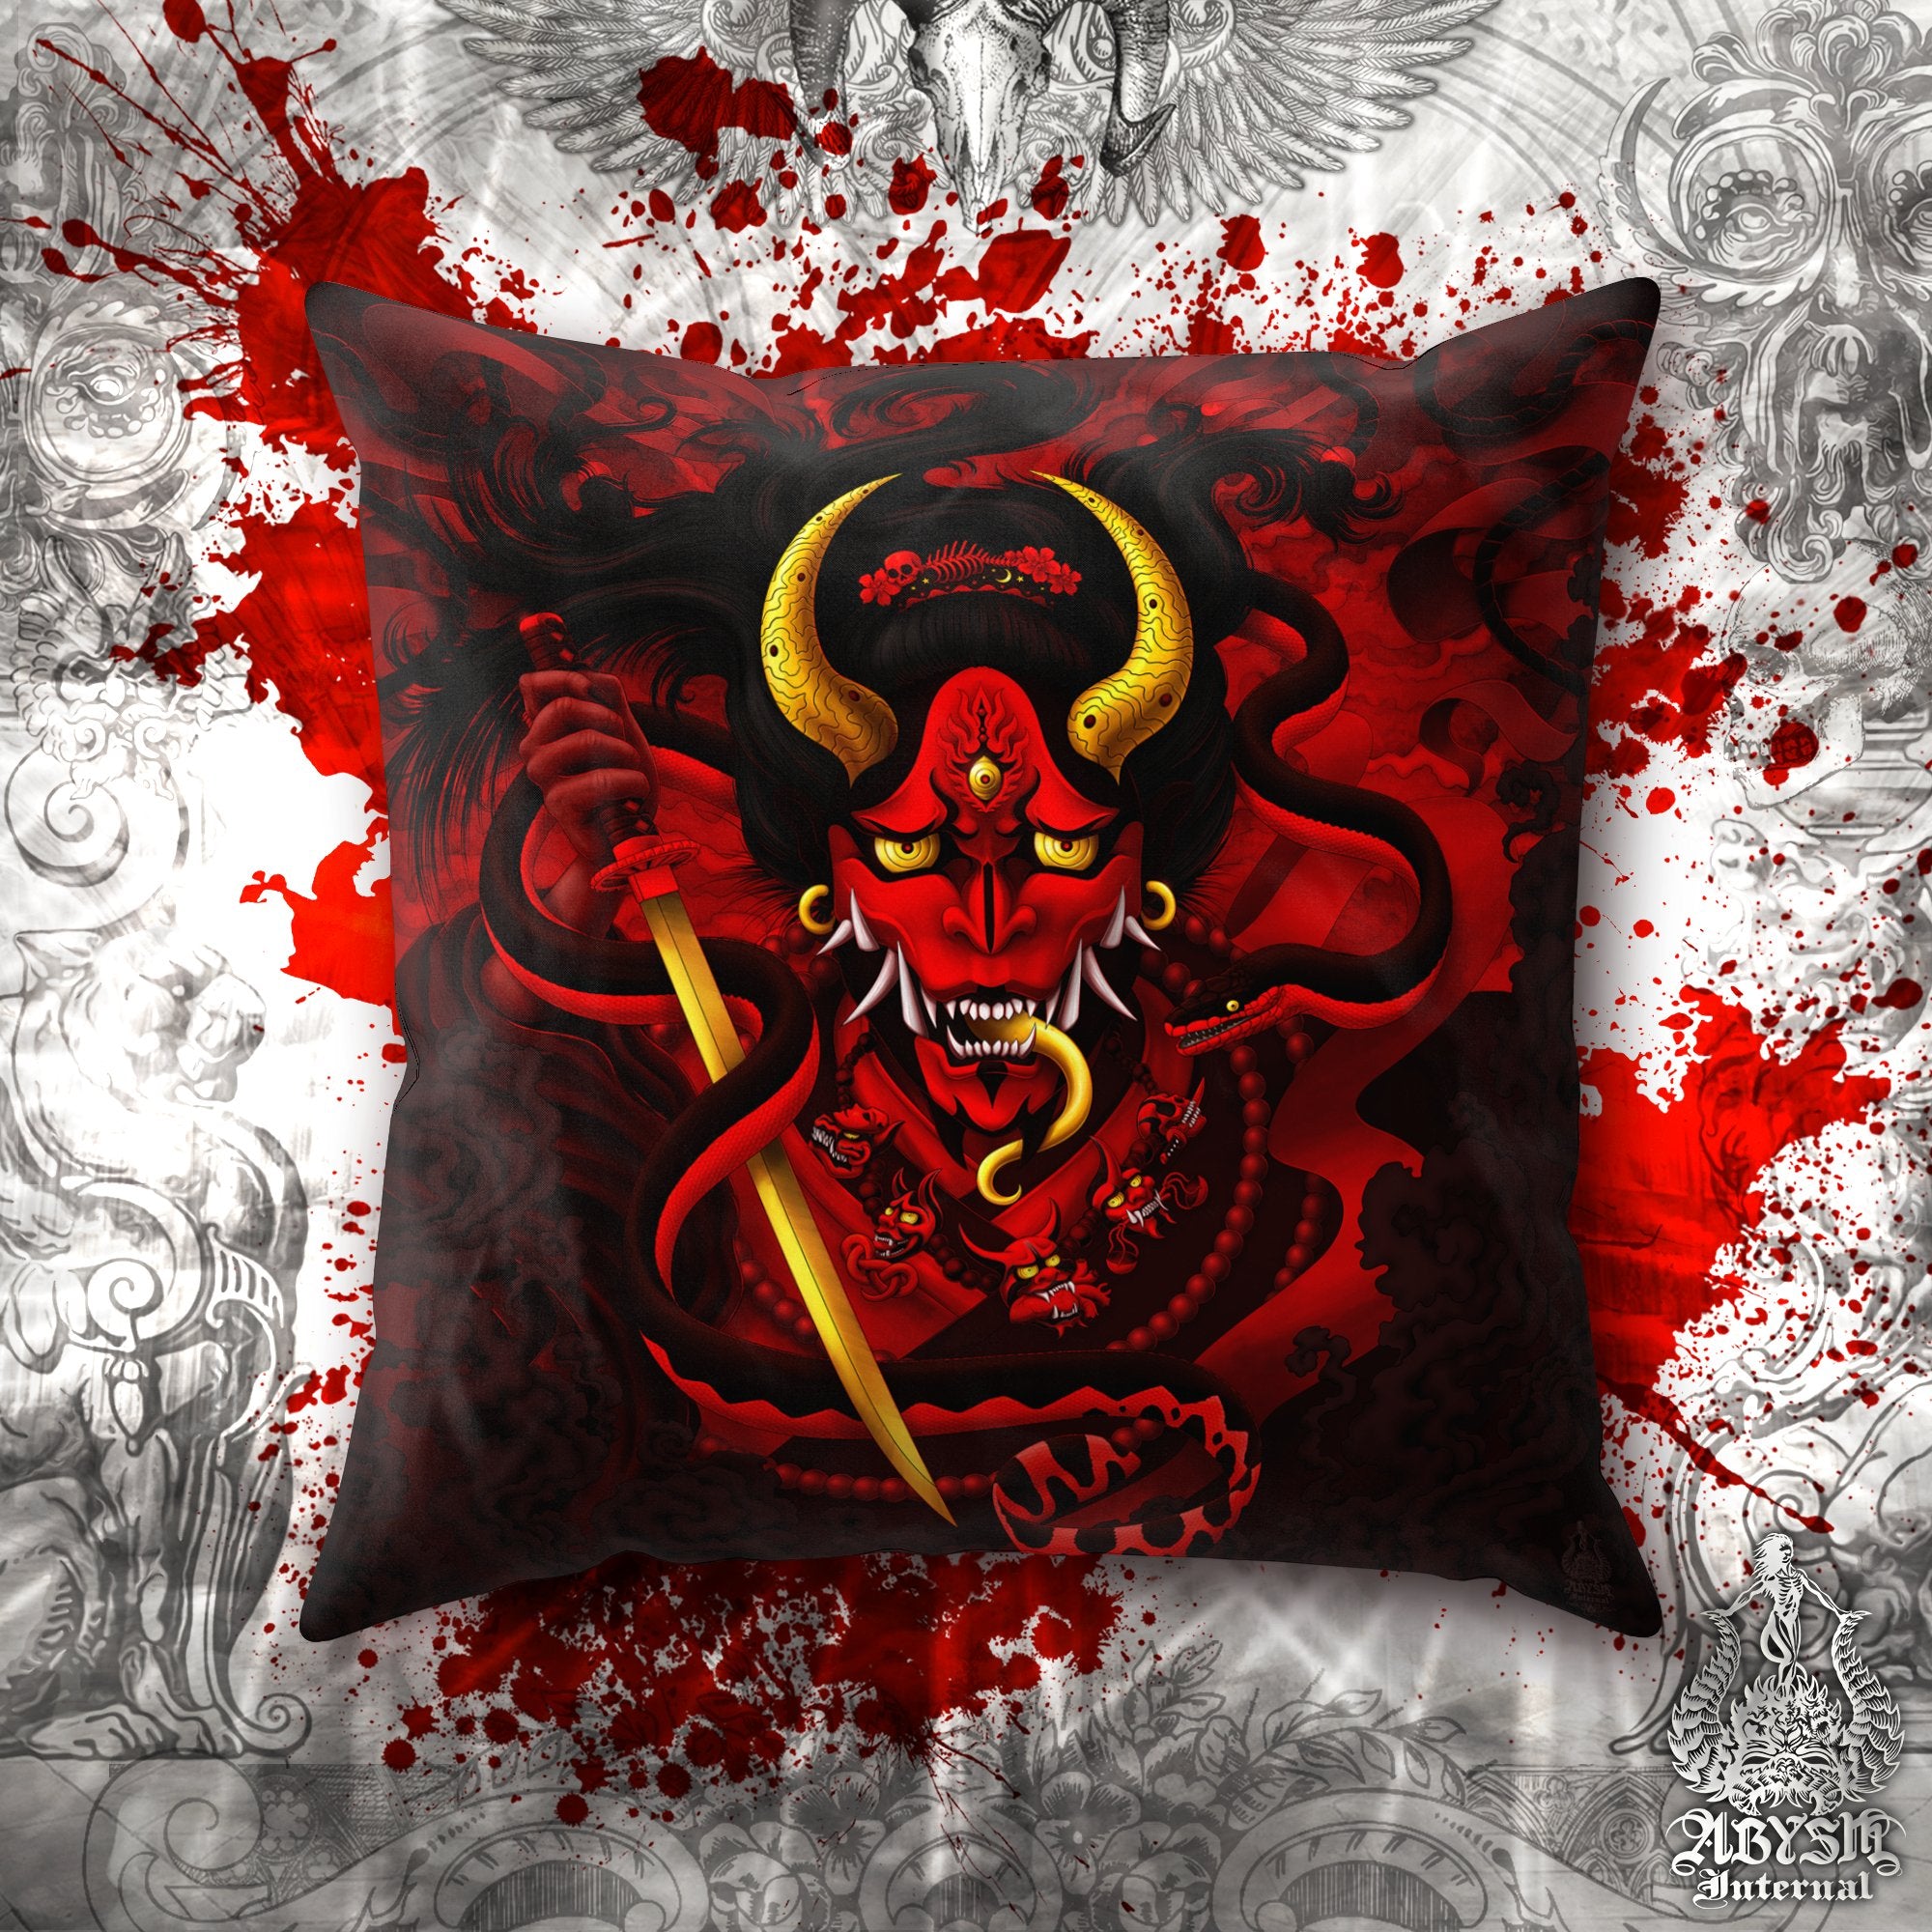 Bloody Gothic Hannya Throw Pillow, Decorative Accent Pillow, Square Cushion Cover, Japanese Demon & Red Snake, Goth Gamer Room Decor - Abysm Internal